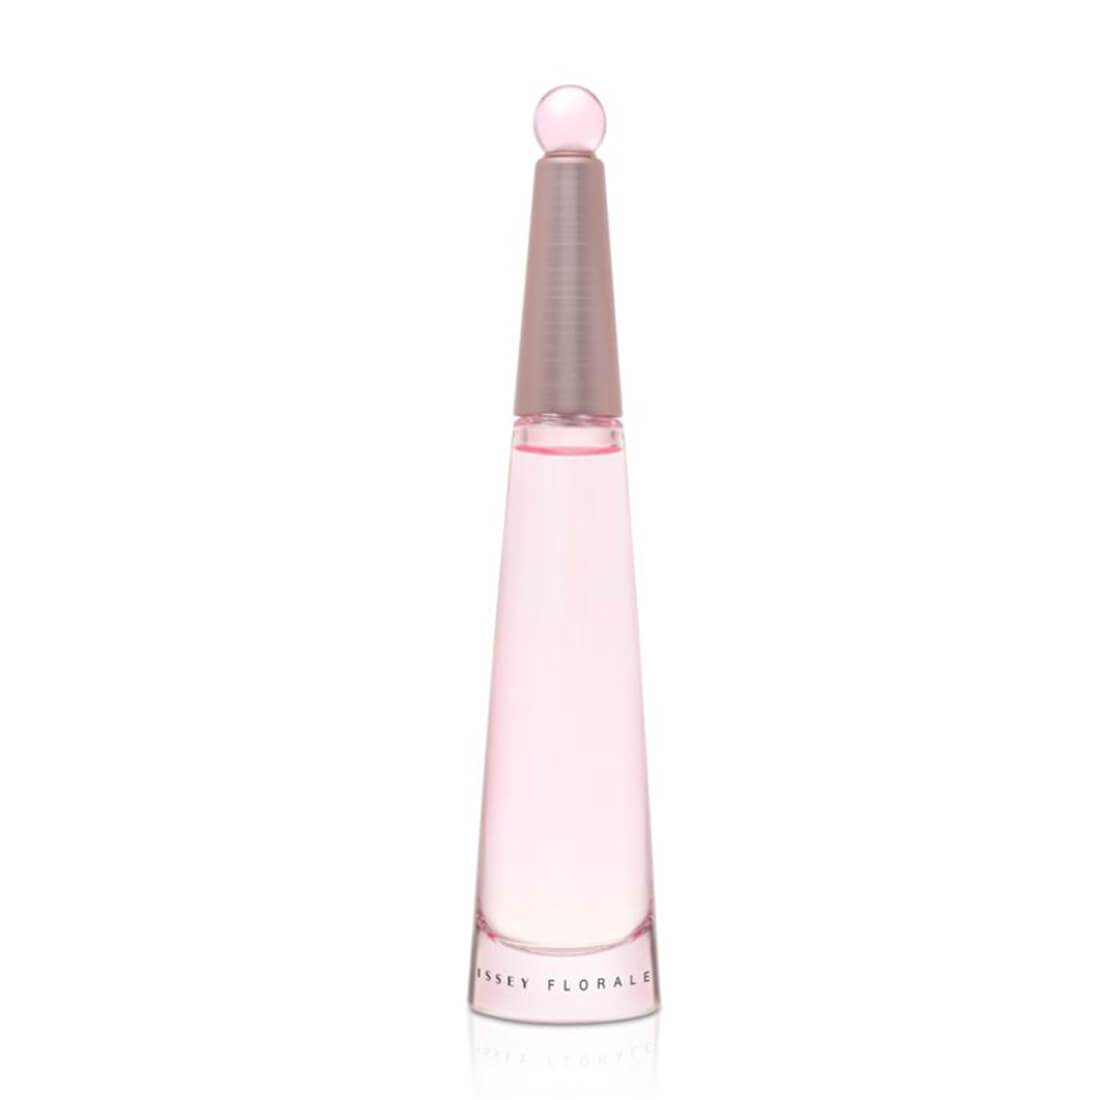 Issey Miyake Florale EDT Perfume For Women - 90ml